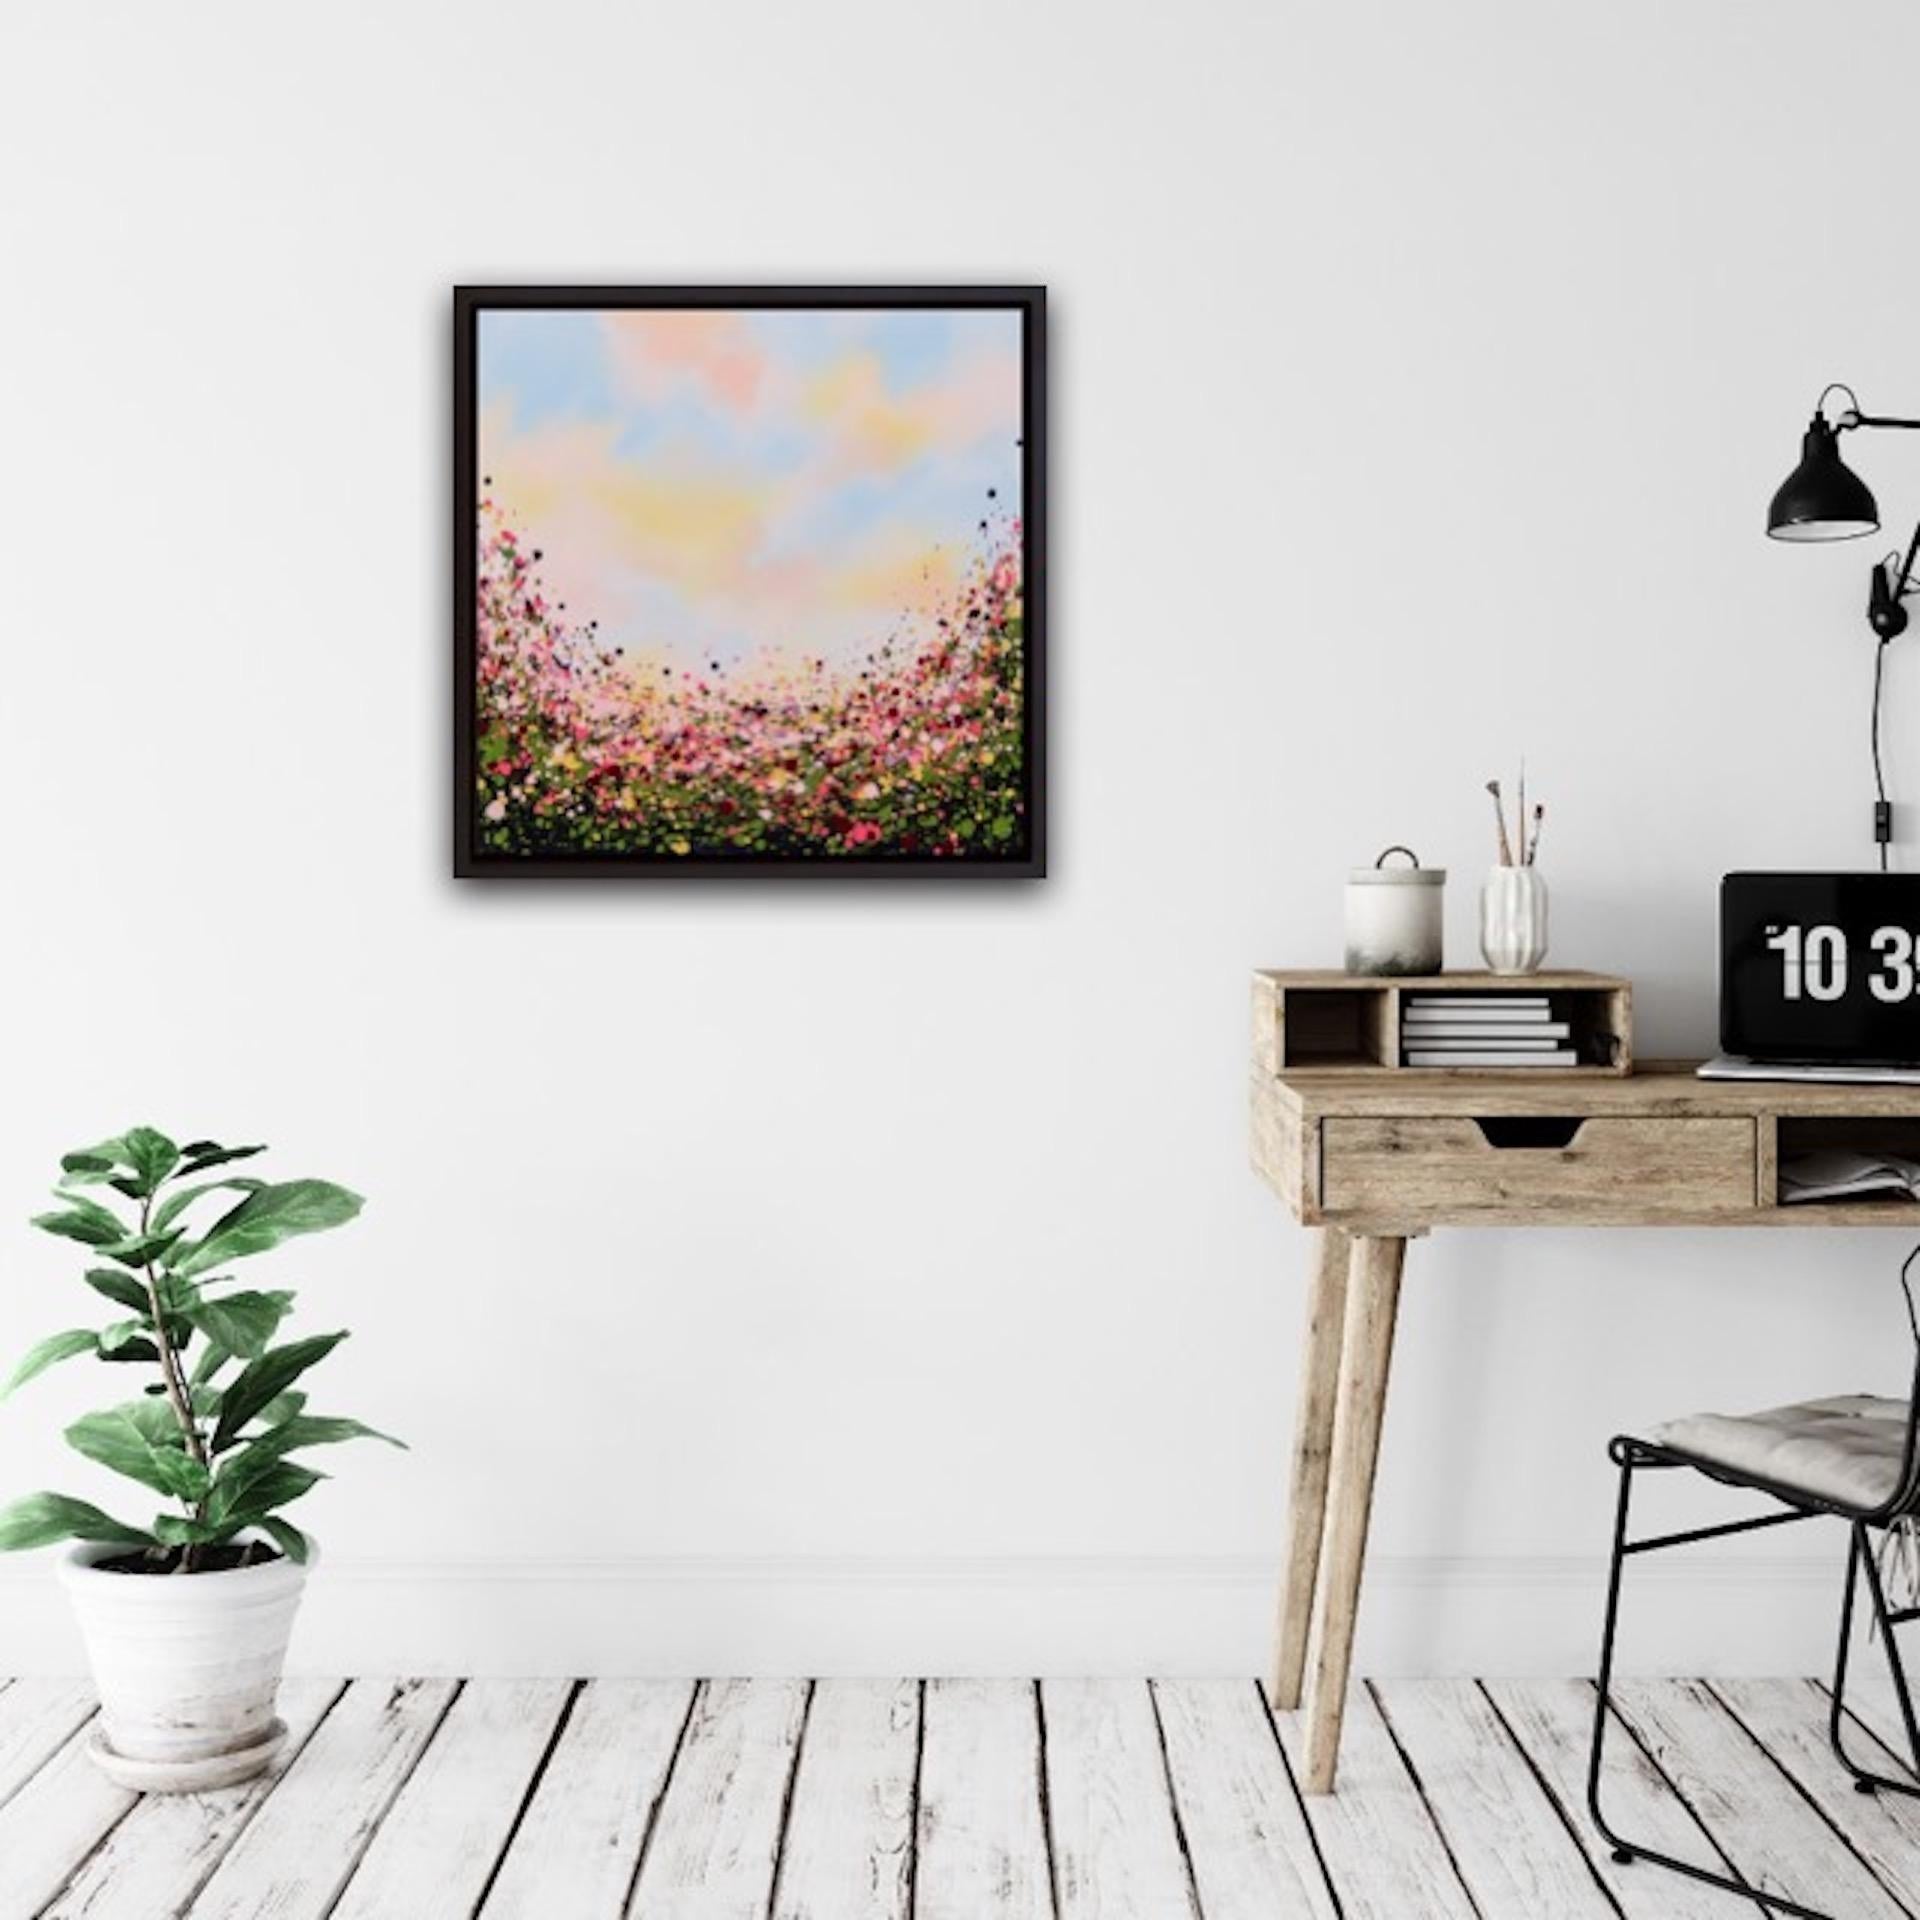 Sophie Berger
Spring Fling
Original Abstract Painting
Oil Paint on Canvas
Image Size: 61 cm x 61 cm x 2.5 cm
Framed Size: 71 cm x 71 cm x 2.5 cm
Sold Framed
(Please note that in situ images are purely an indication of how a piece may look.)

Spring